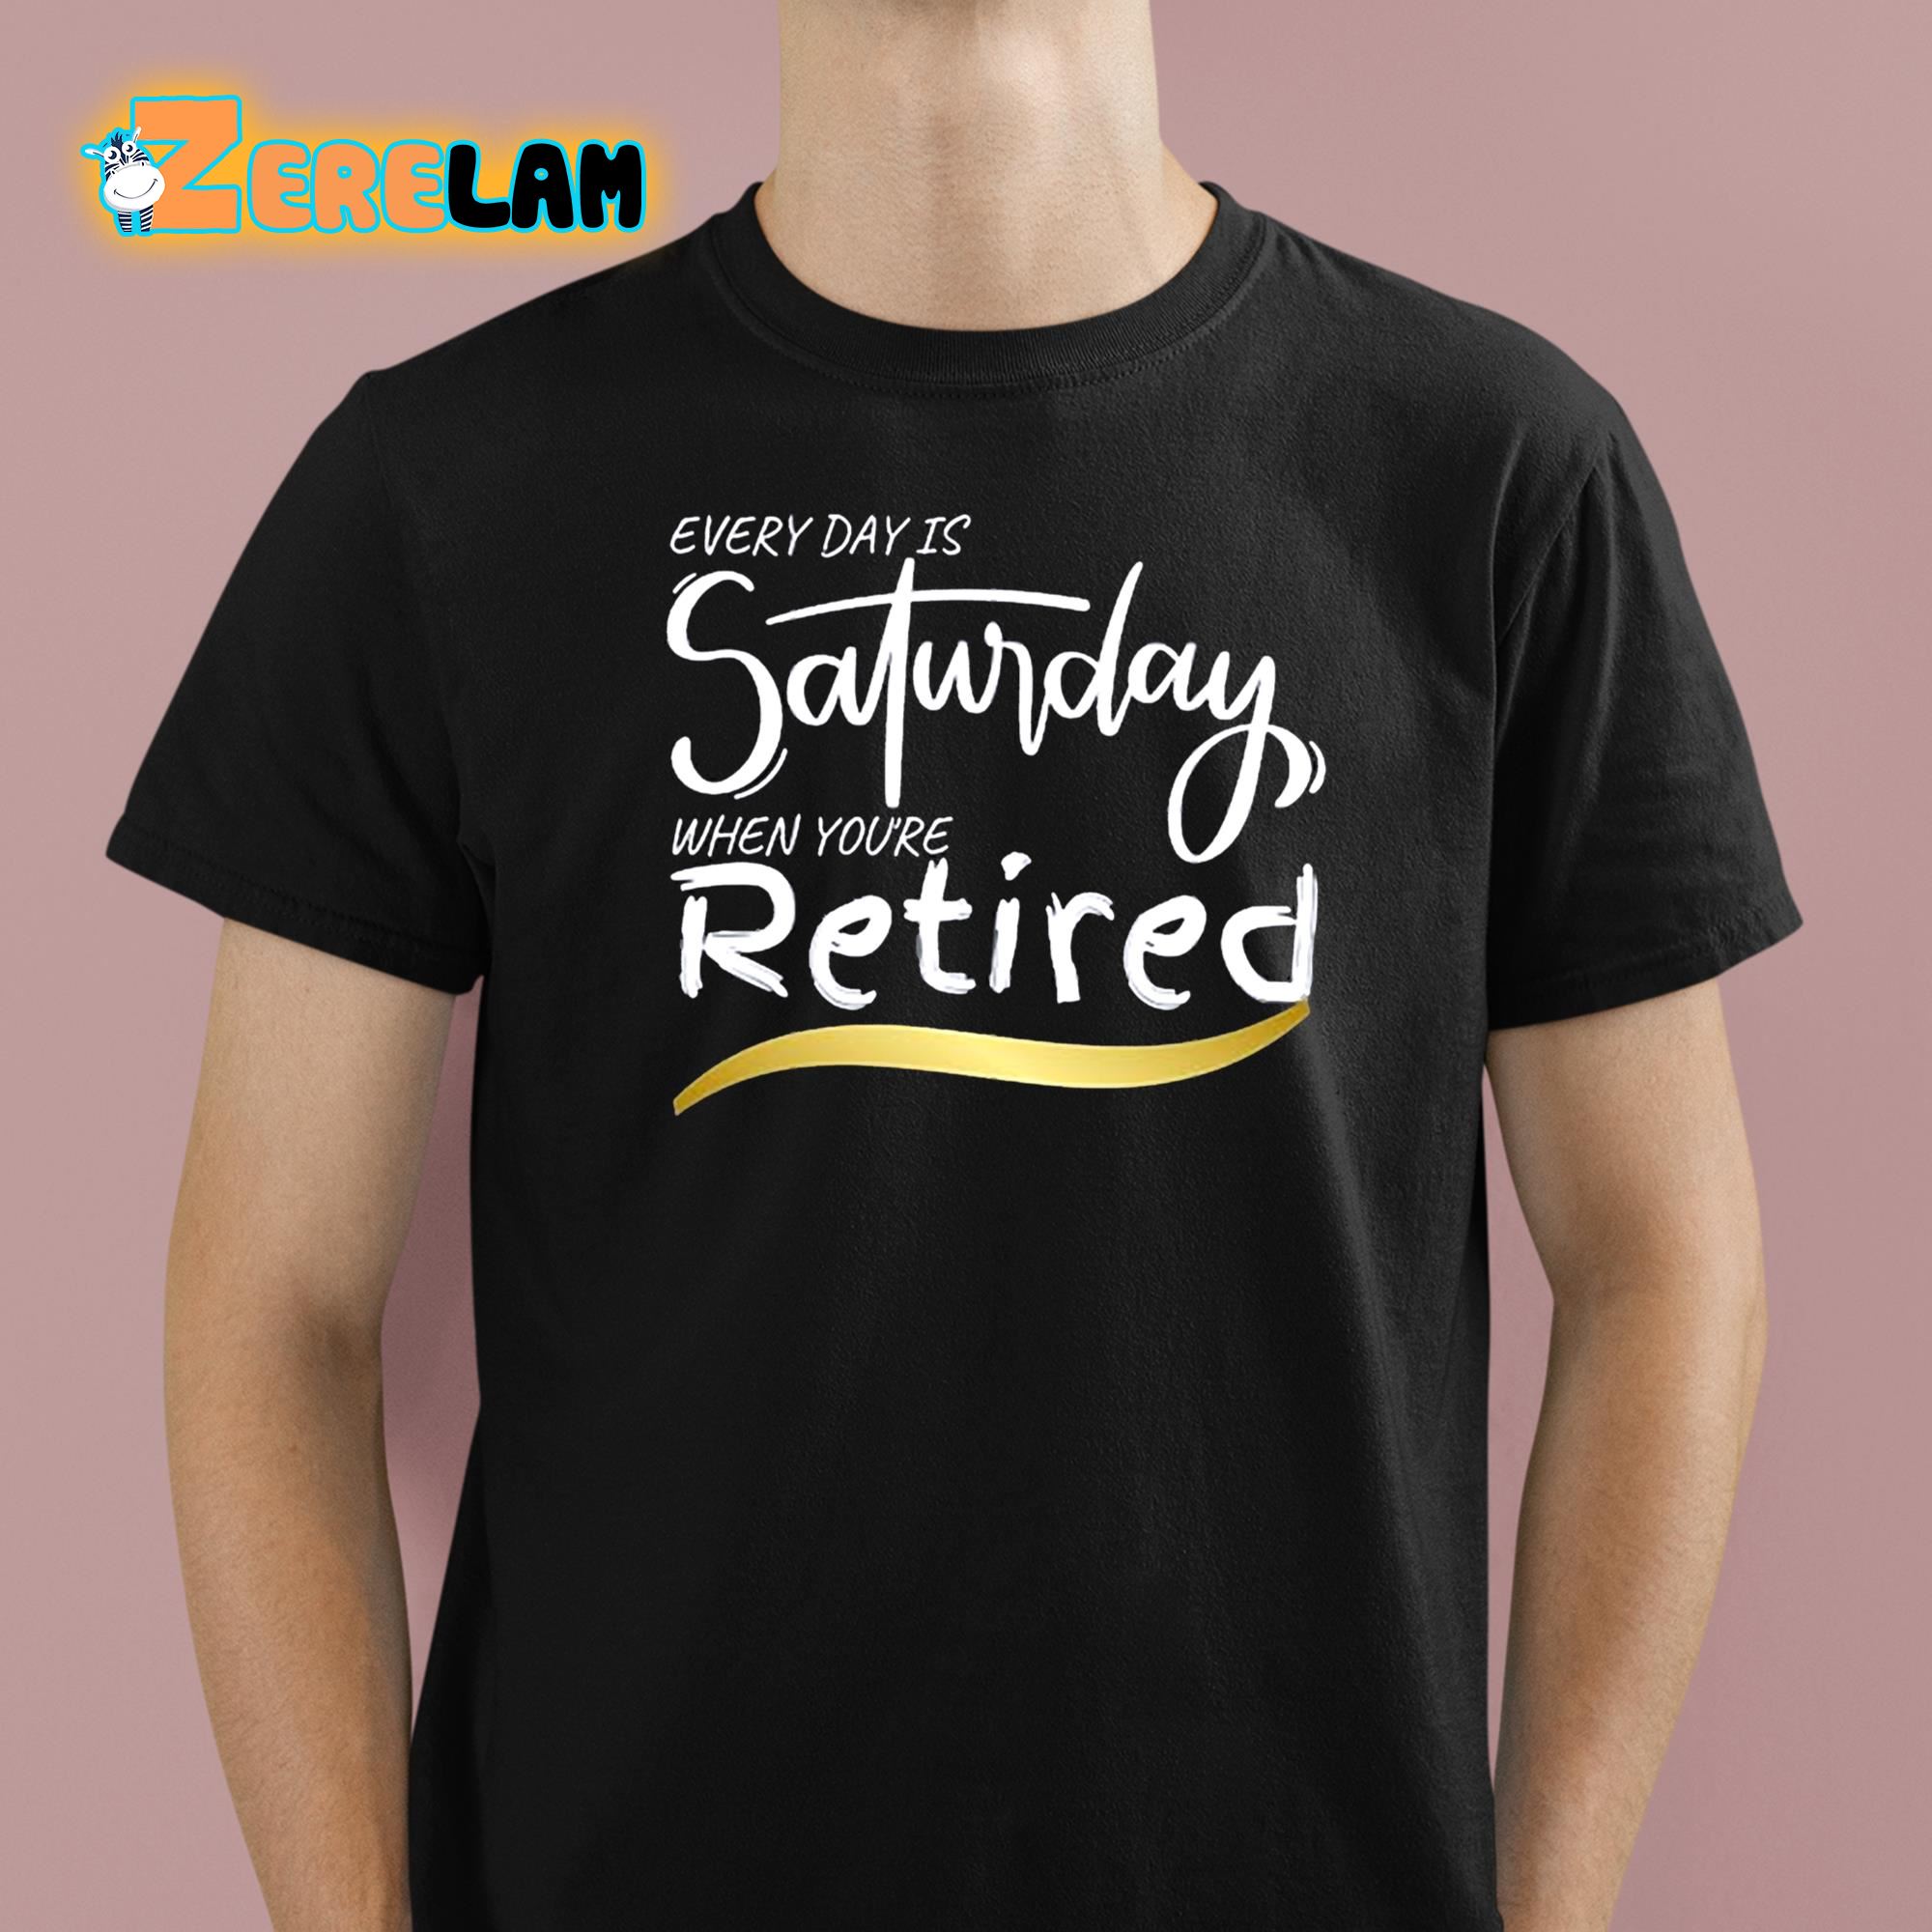 Every Day Is Saturday When You're Retired Shirt